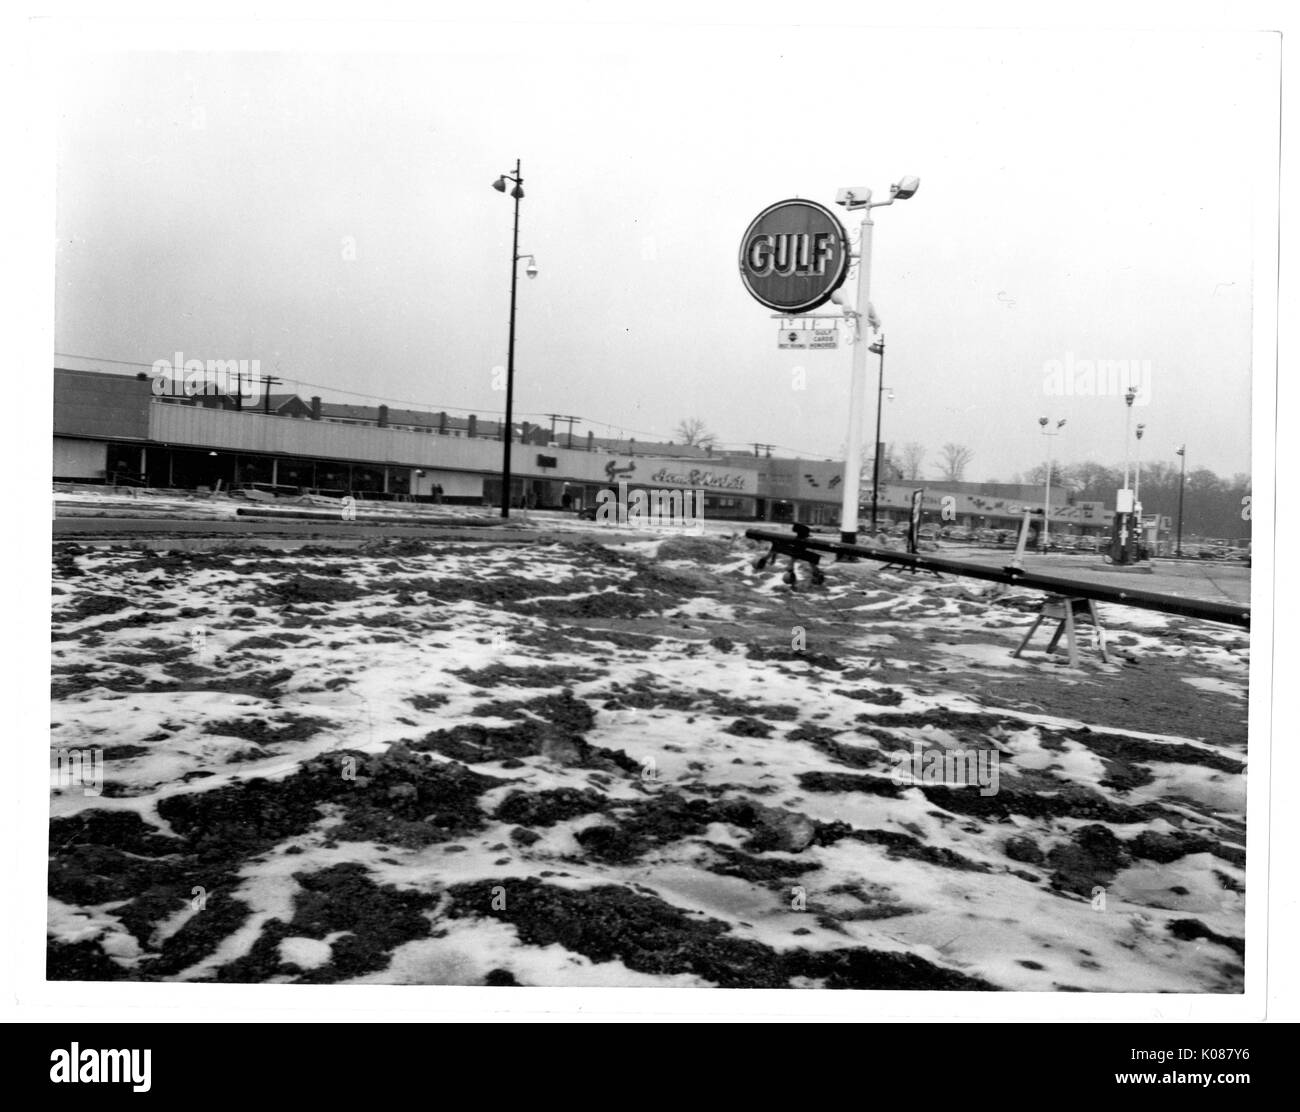 View of snow on top of dirt at a construction zone, there is a large GULF gas station sign by the construction zone and there is a shopping center in the background, across the street, Baltimore, Maryland, 1951. Stock Photo